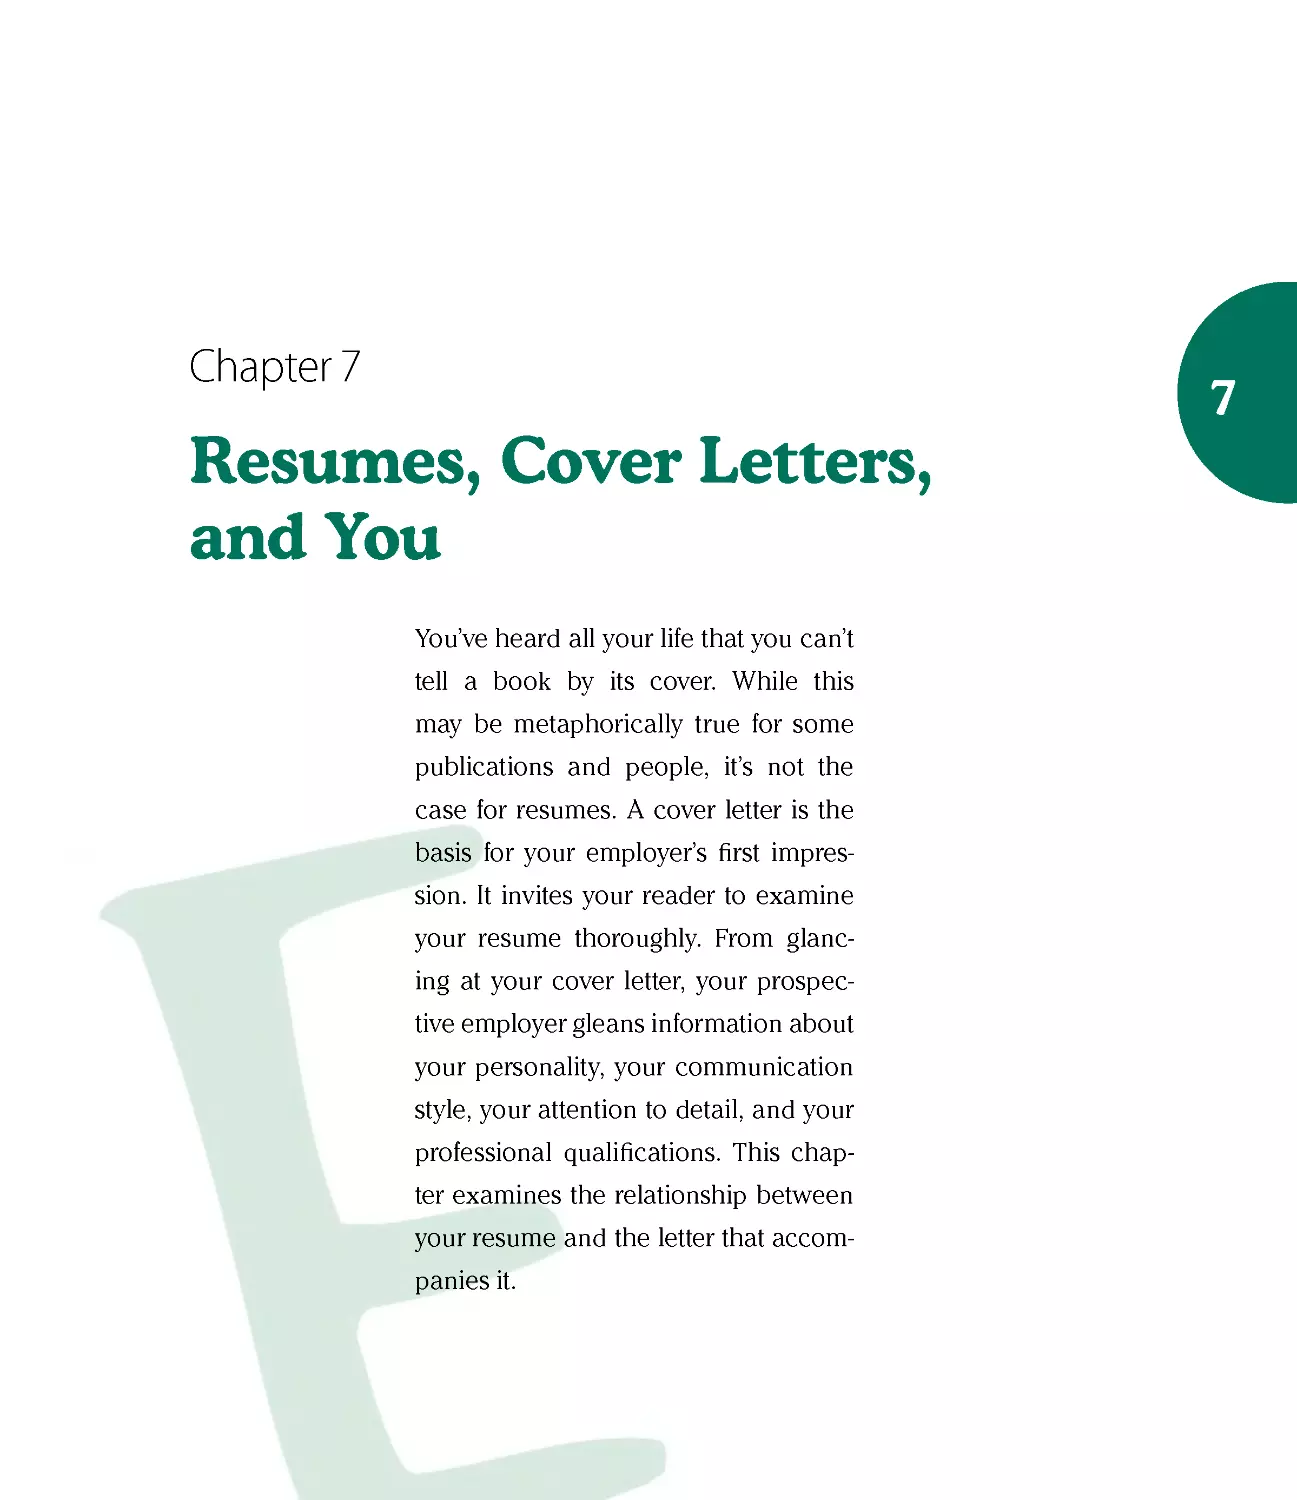 Chapter 7: Resumes, Cover Letters, and You